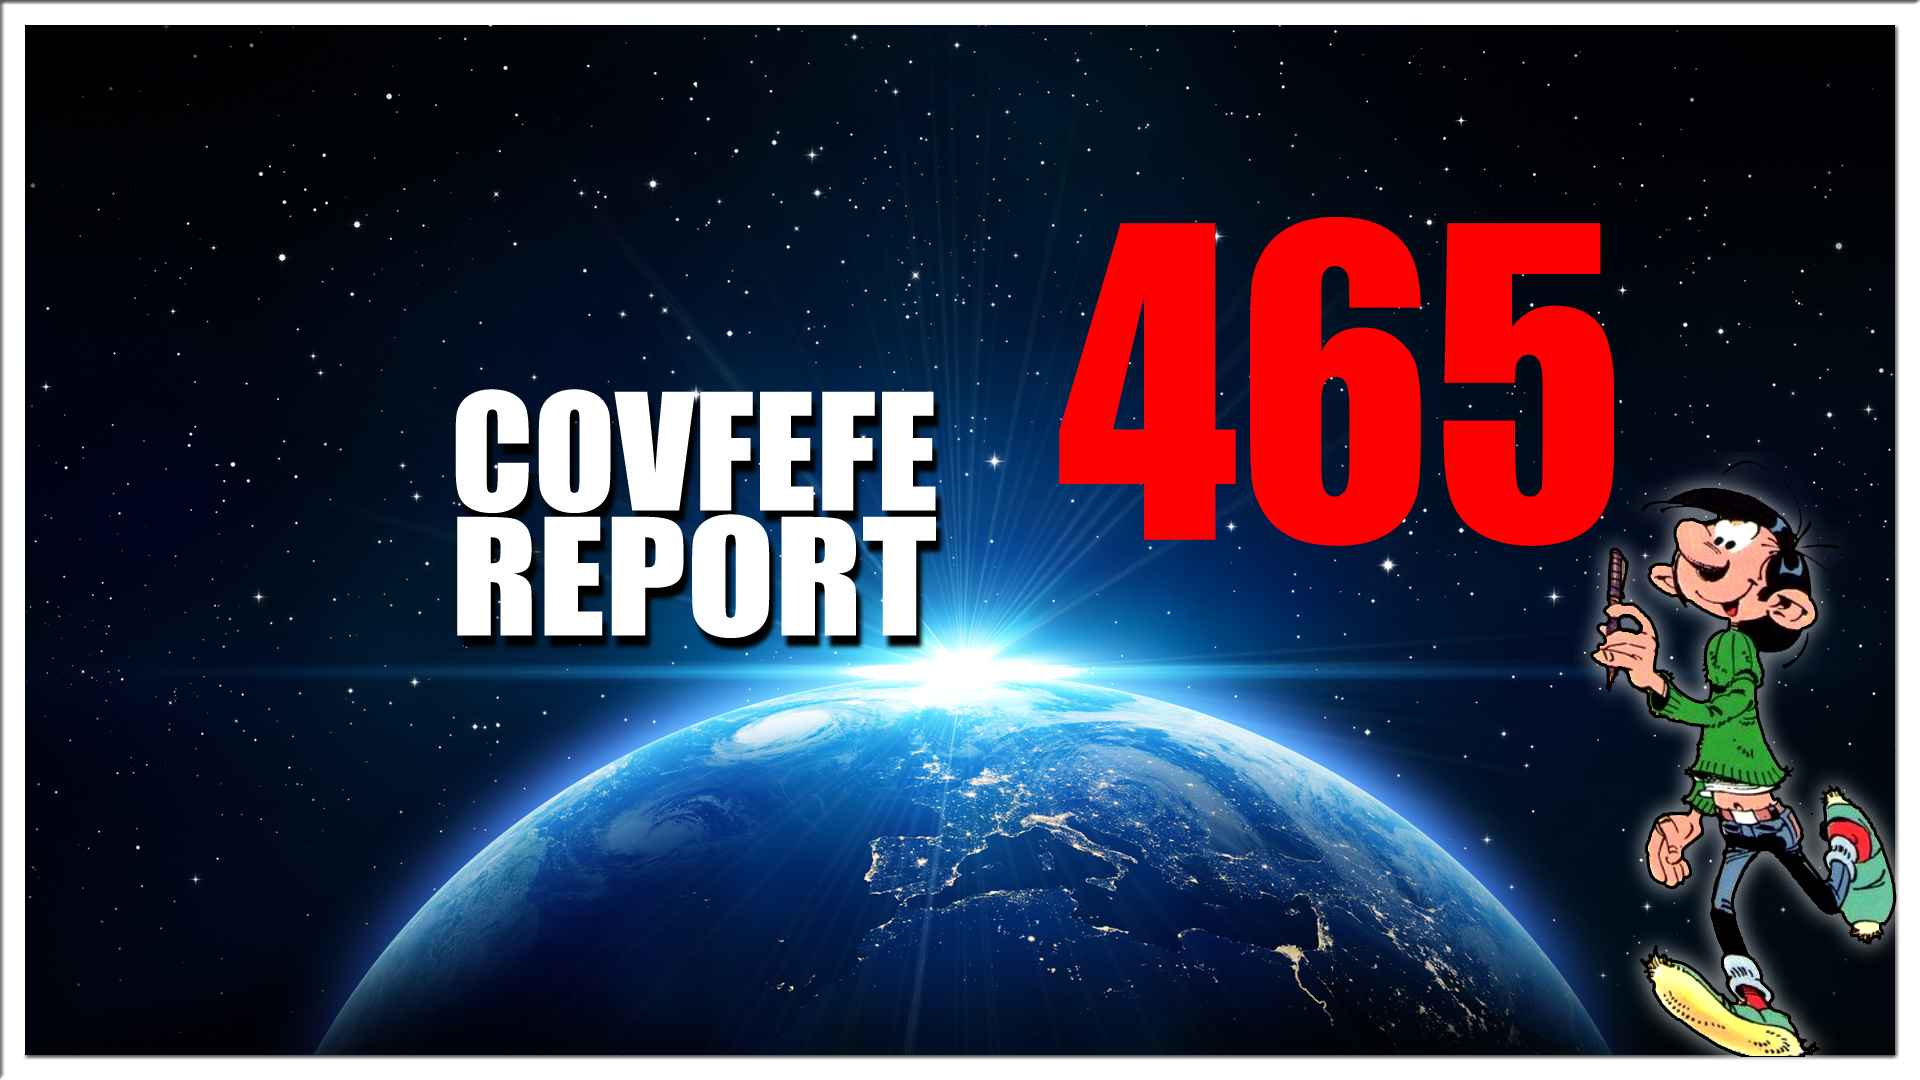 Covfefe Report 465. It's going to be a very hot summer,, Samen sterker, NODV, TG-reacties